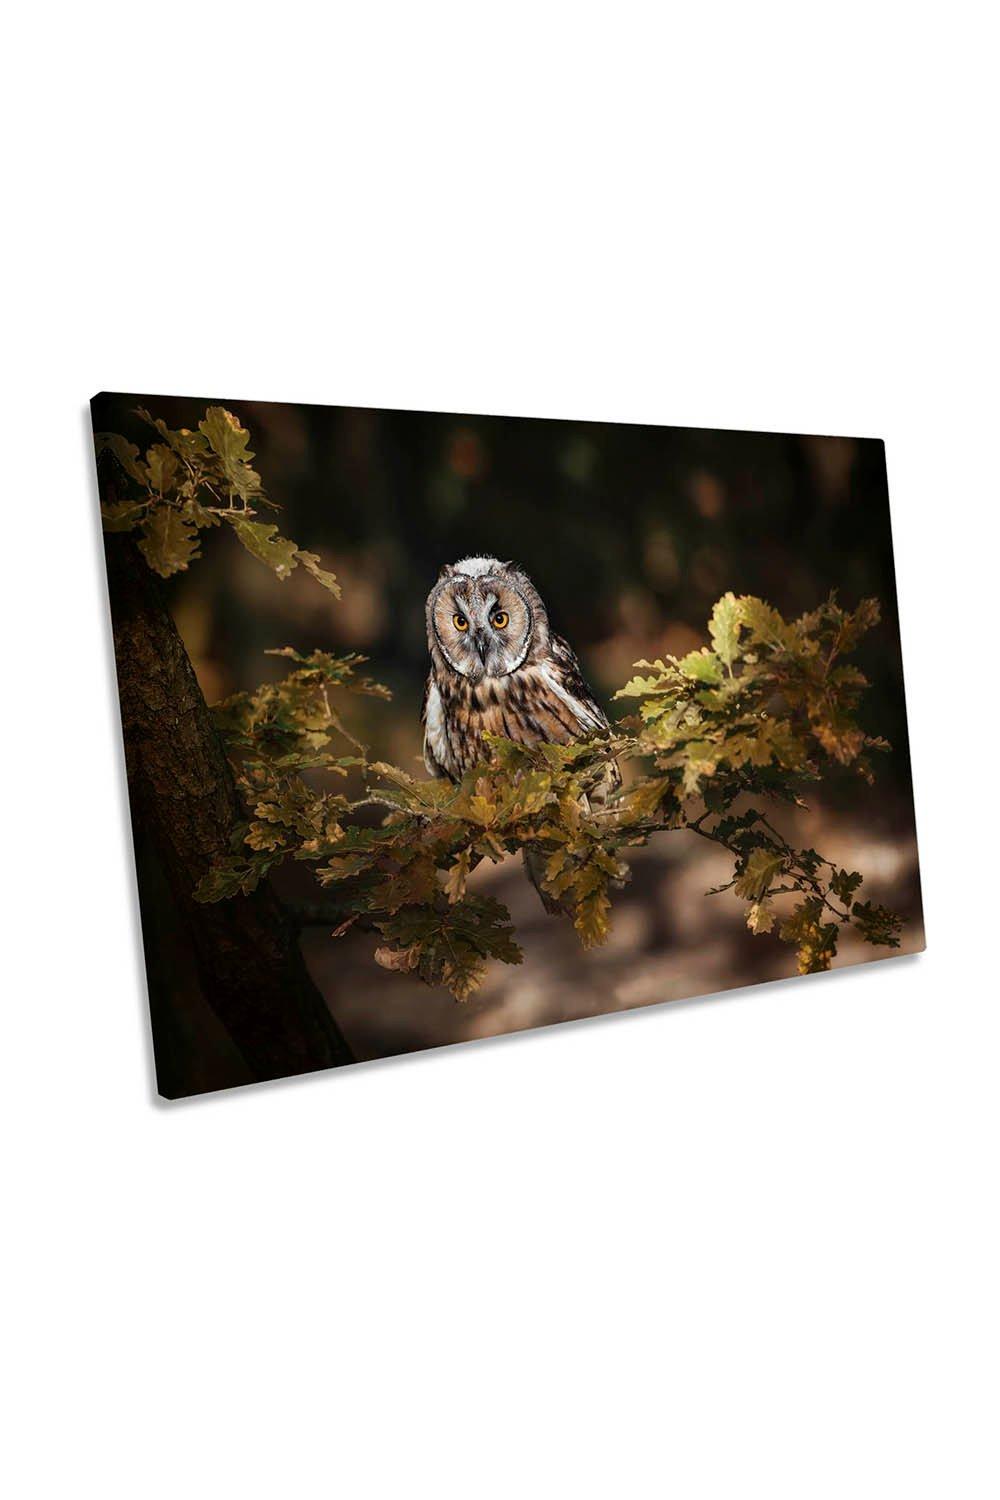 Long Eared Owl Nature Wildlife Canvas Wall Art Picture Print